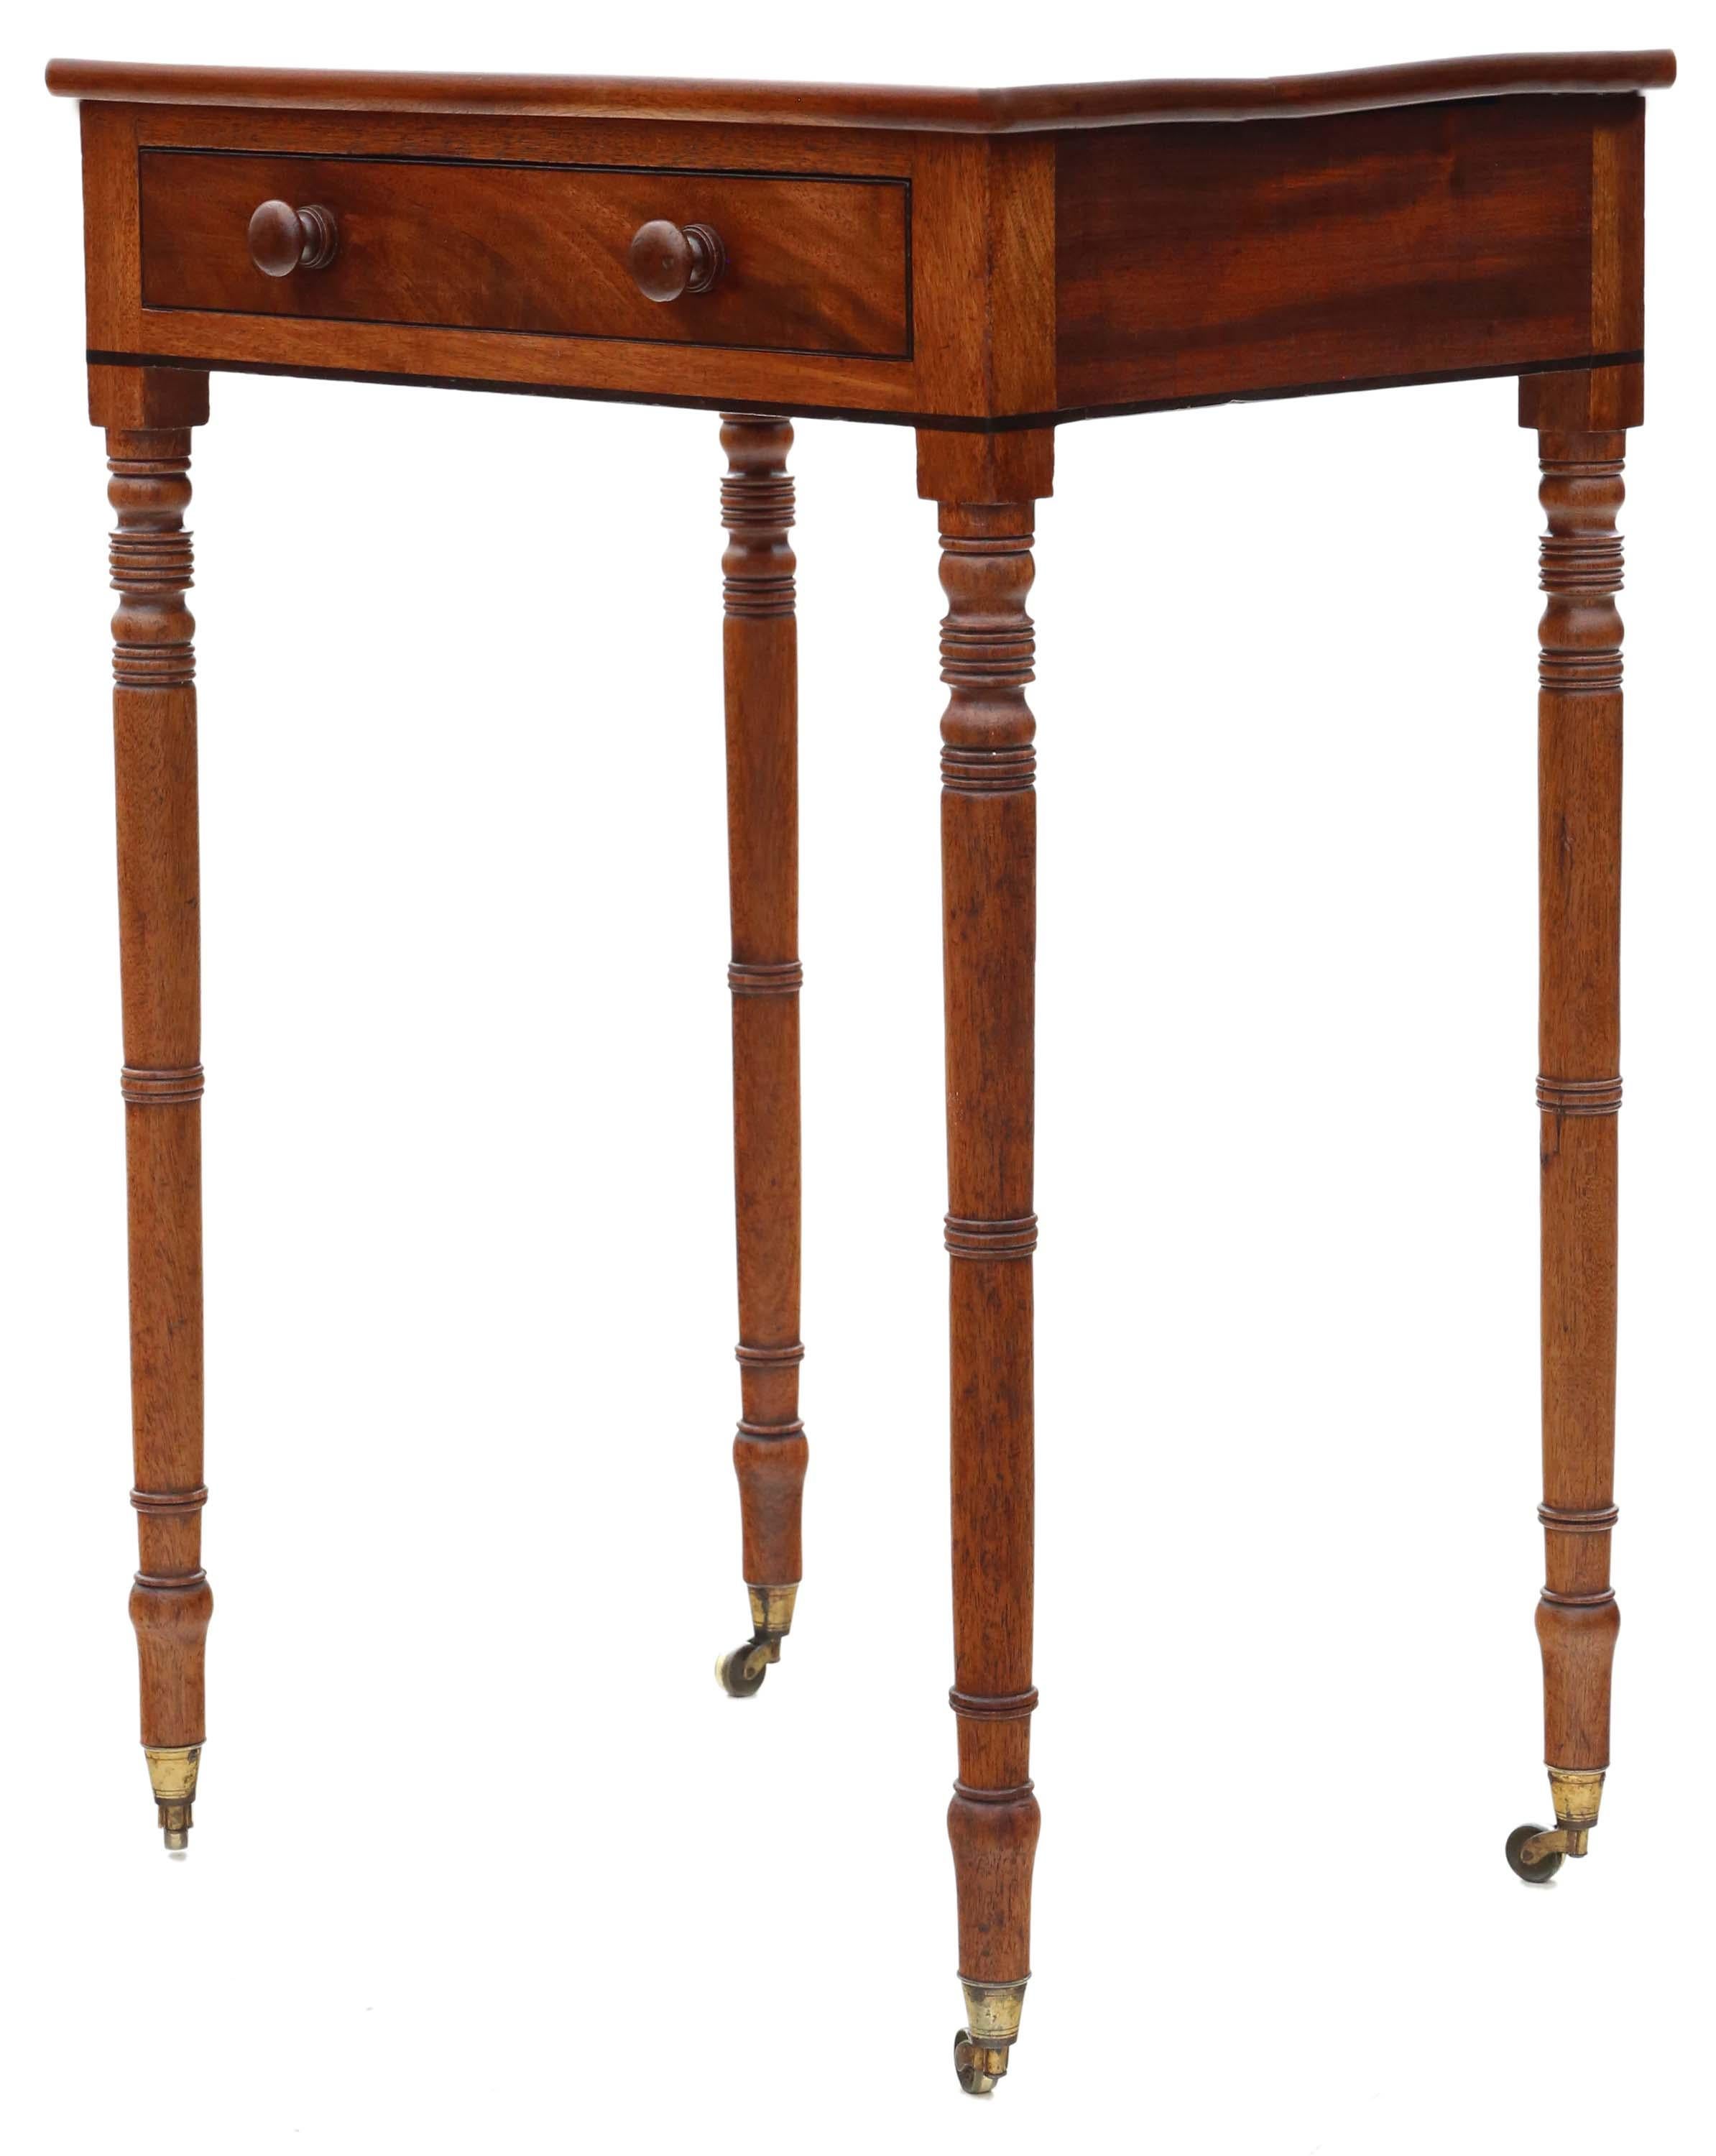 Mahogany Antique very fine quality small 19th Century mahogany writing side table desk For Sale